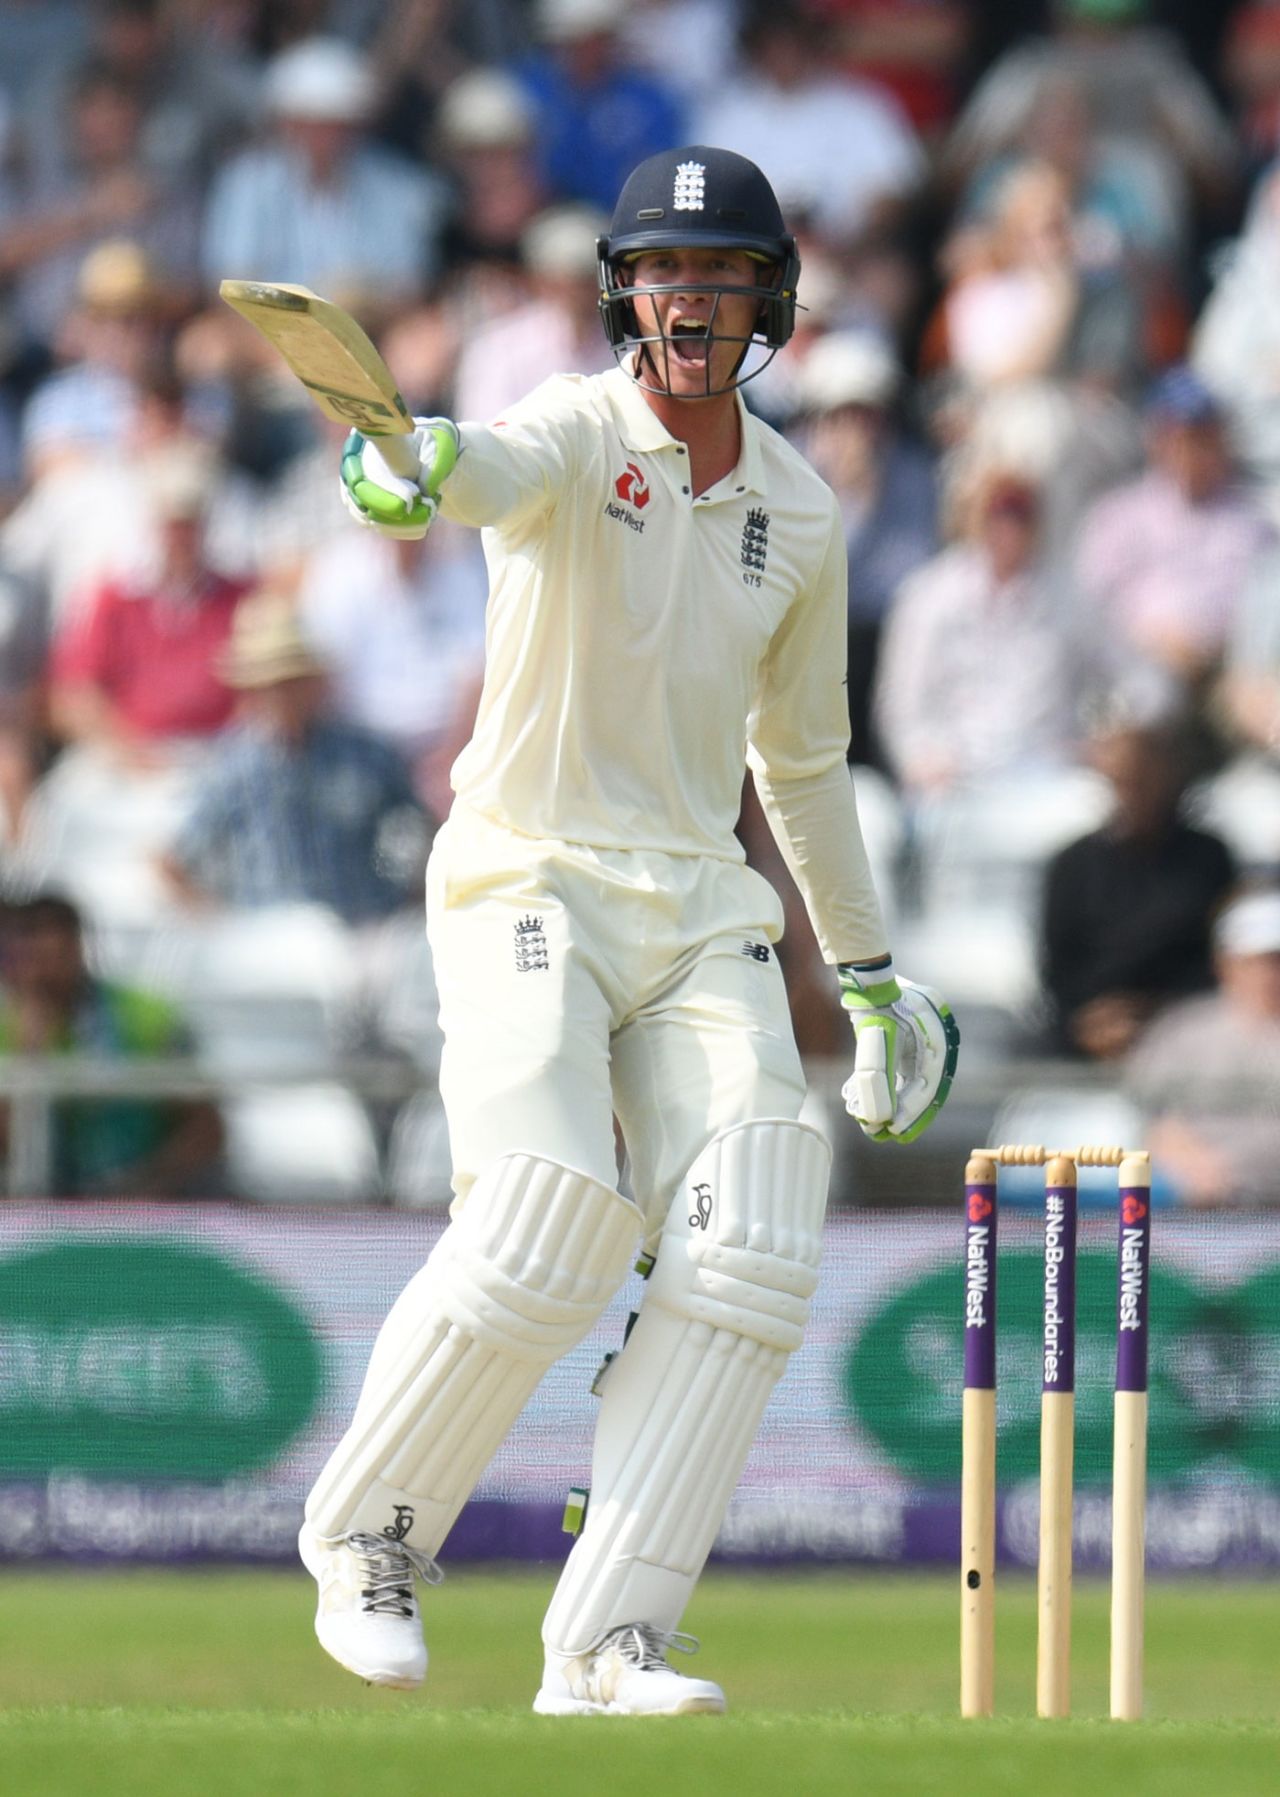 Keaton Jennings was making his Test comeback after 10 months out of the side, England v Pakistan, 2nd Test, Headingley, June 1, 2018